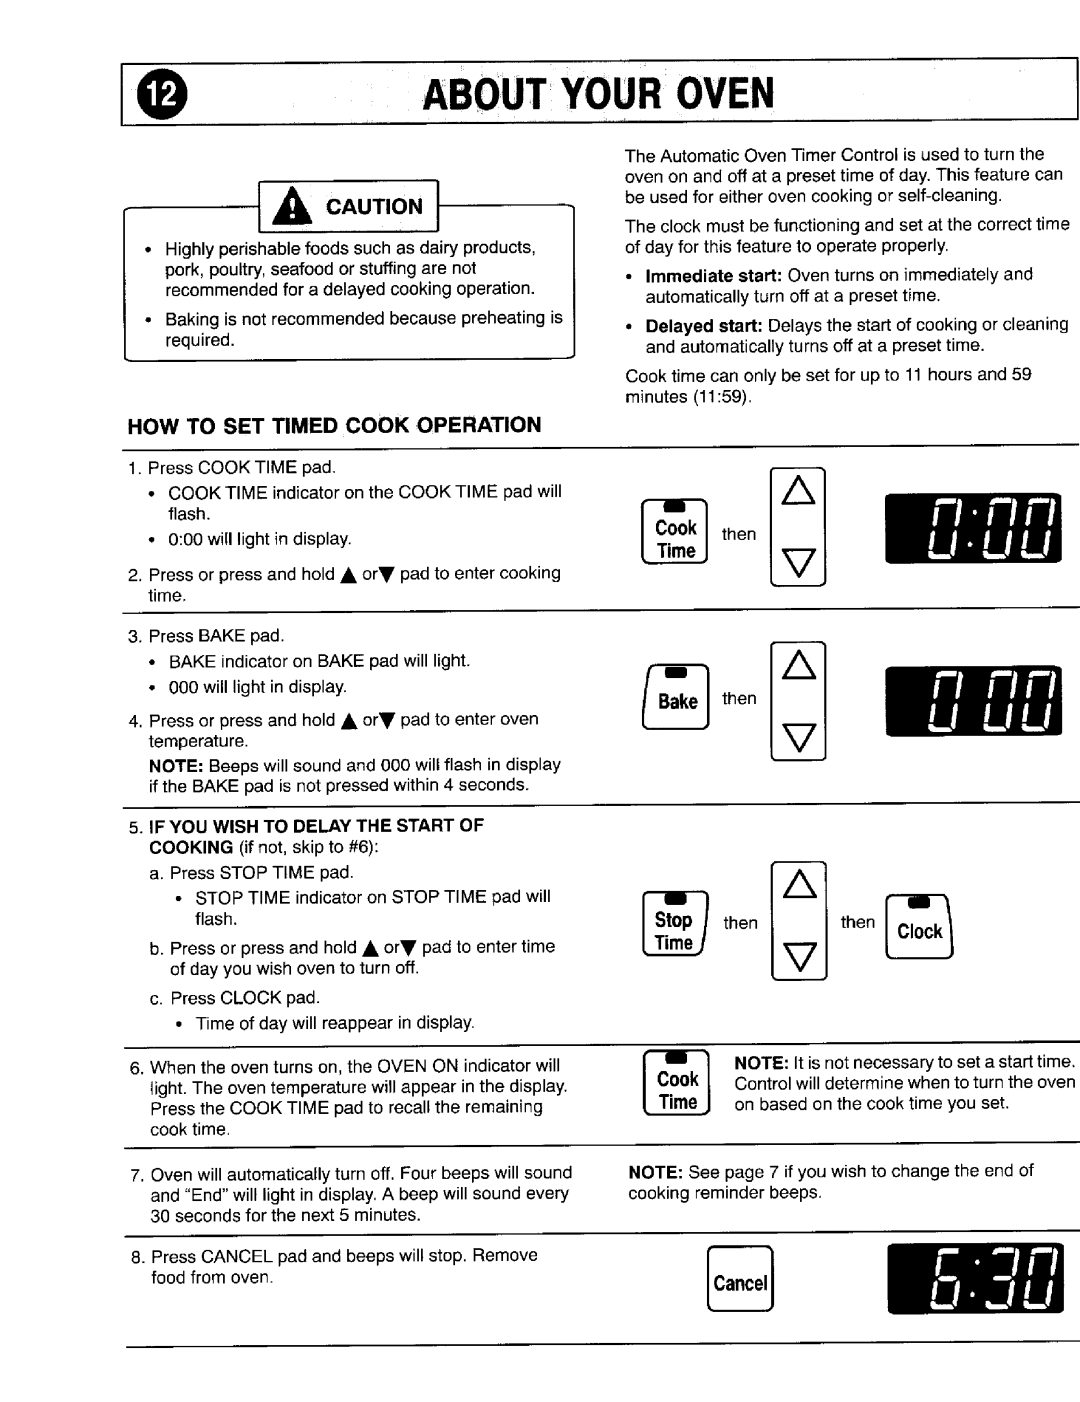 Maytag 8111P375-60 important safety instructions c oce,J, t lL CAUTION, How To Set Timed Cook Operation, I Aboutyouroven 